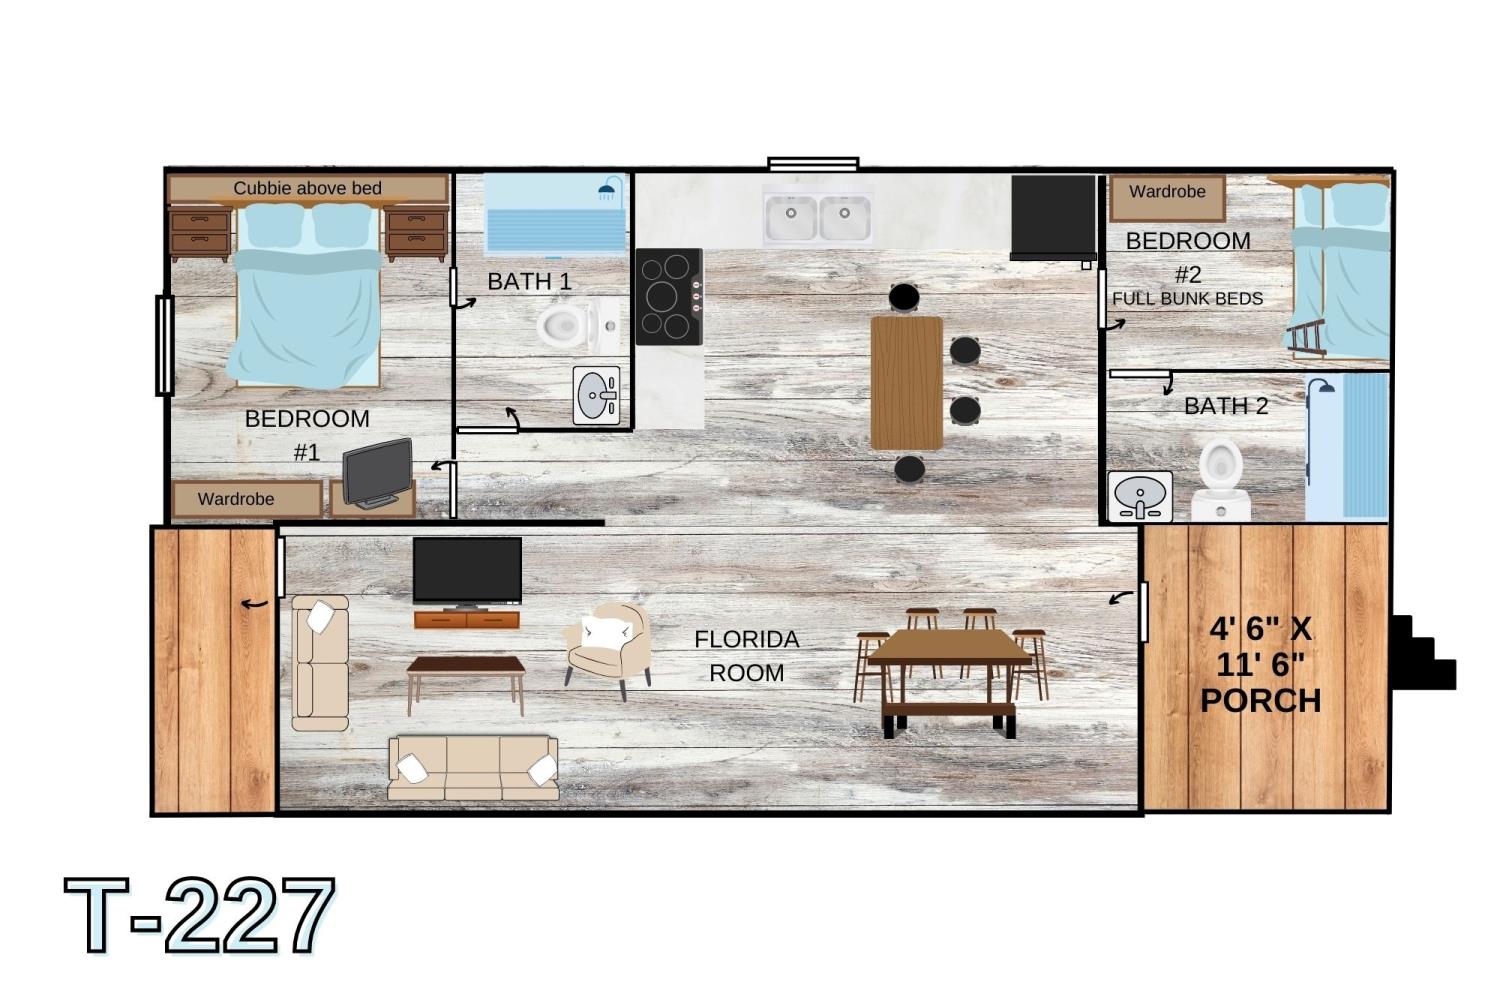 Floorplan for T227 Lake Area - Weekly Rental (Saturday 2 pm to Saturday 10 am)